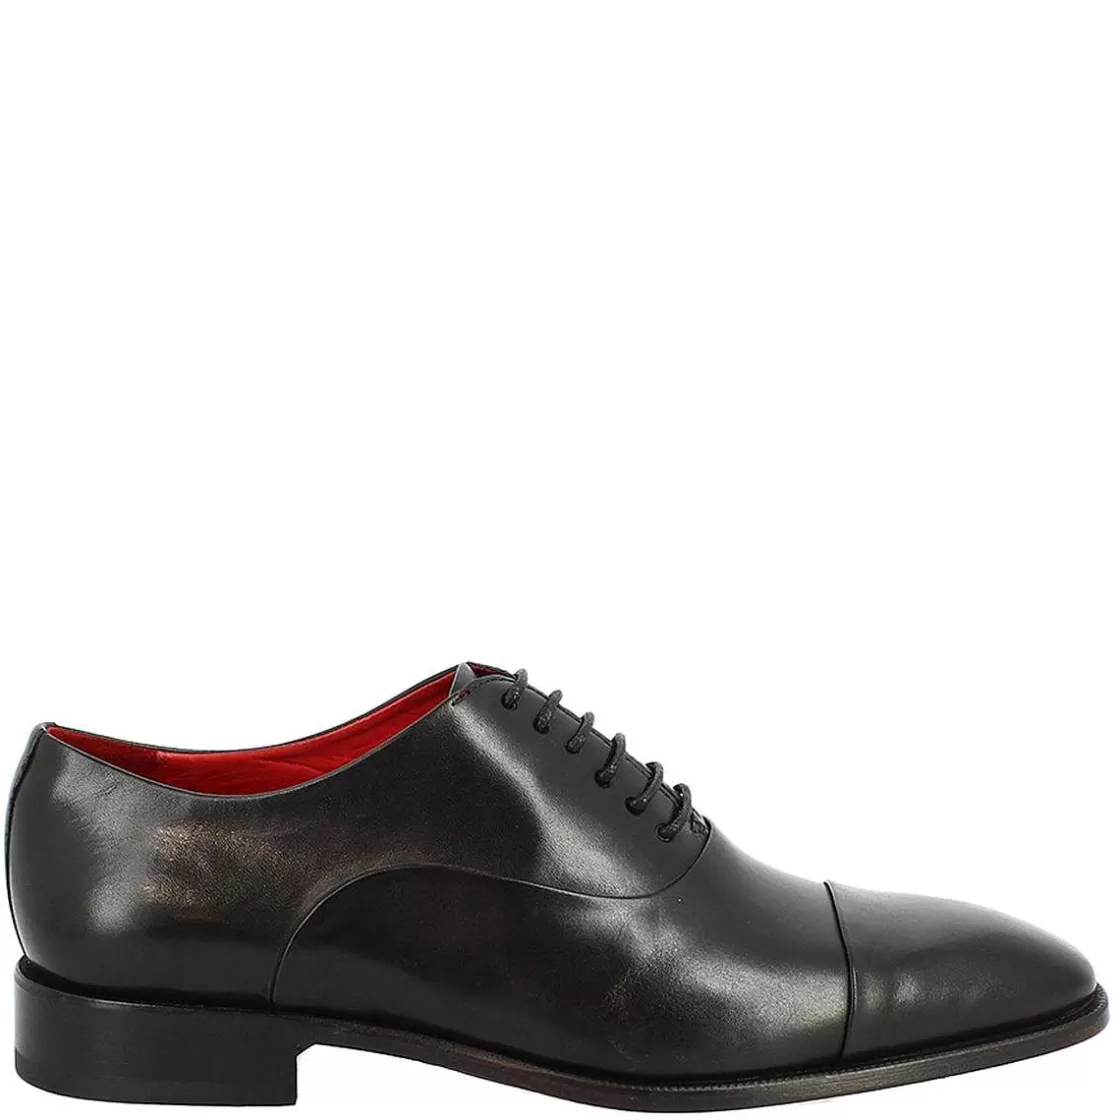 Leonardo Oxford Shoes With Toe Cap In Black Leather New